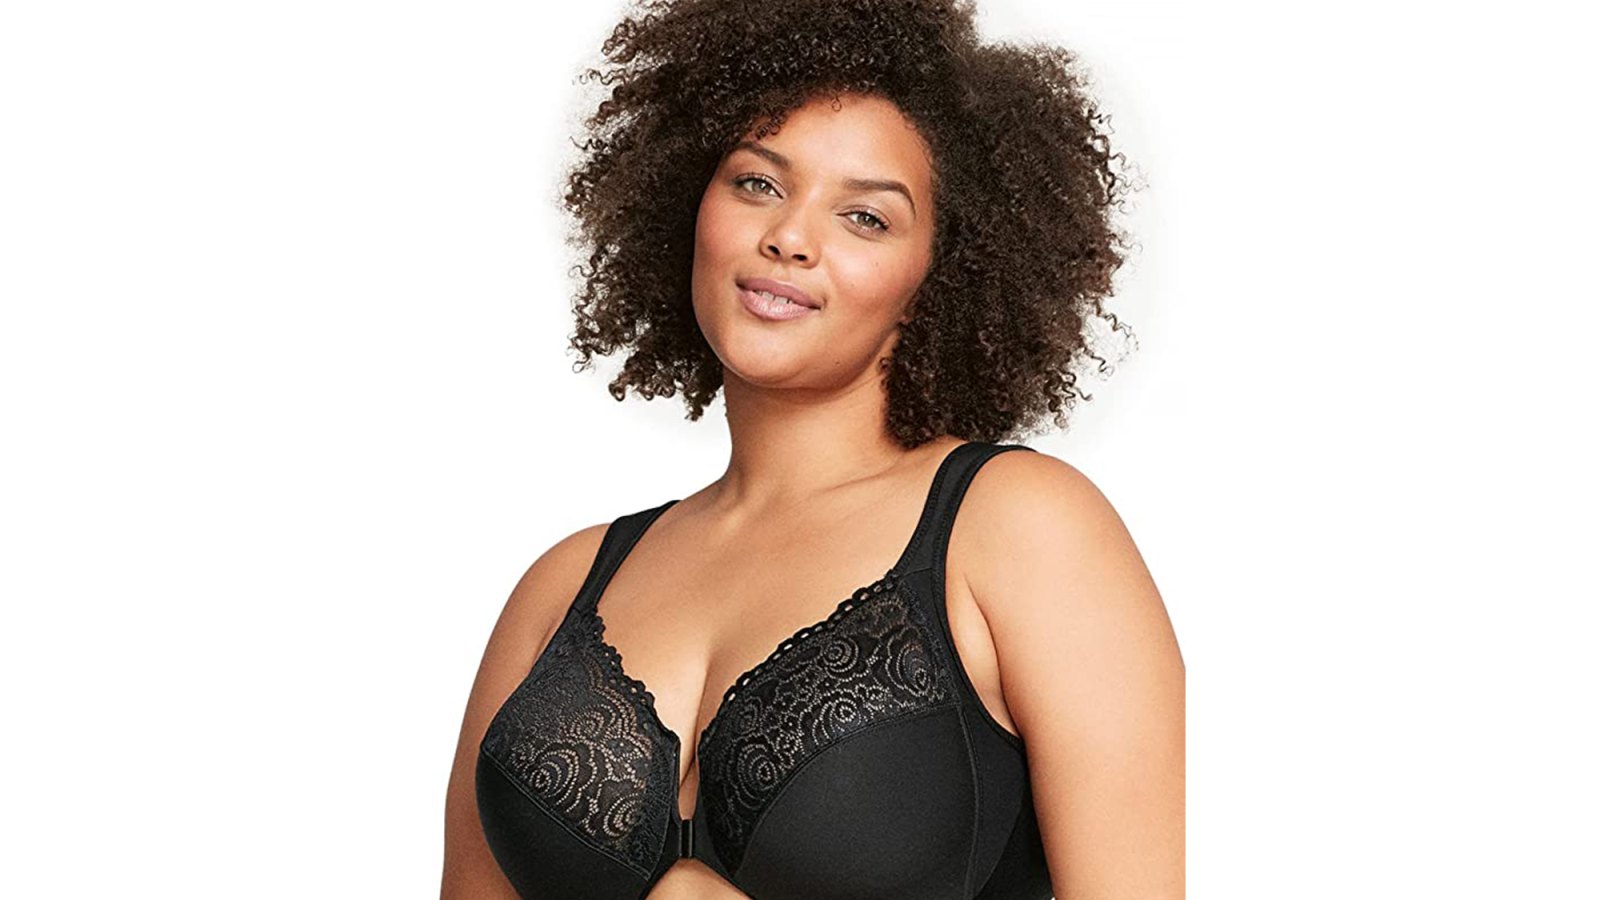 Glamorise - Stock up on your favorite styles. All bras are